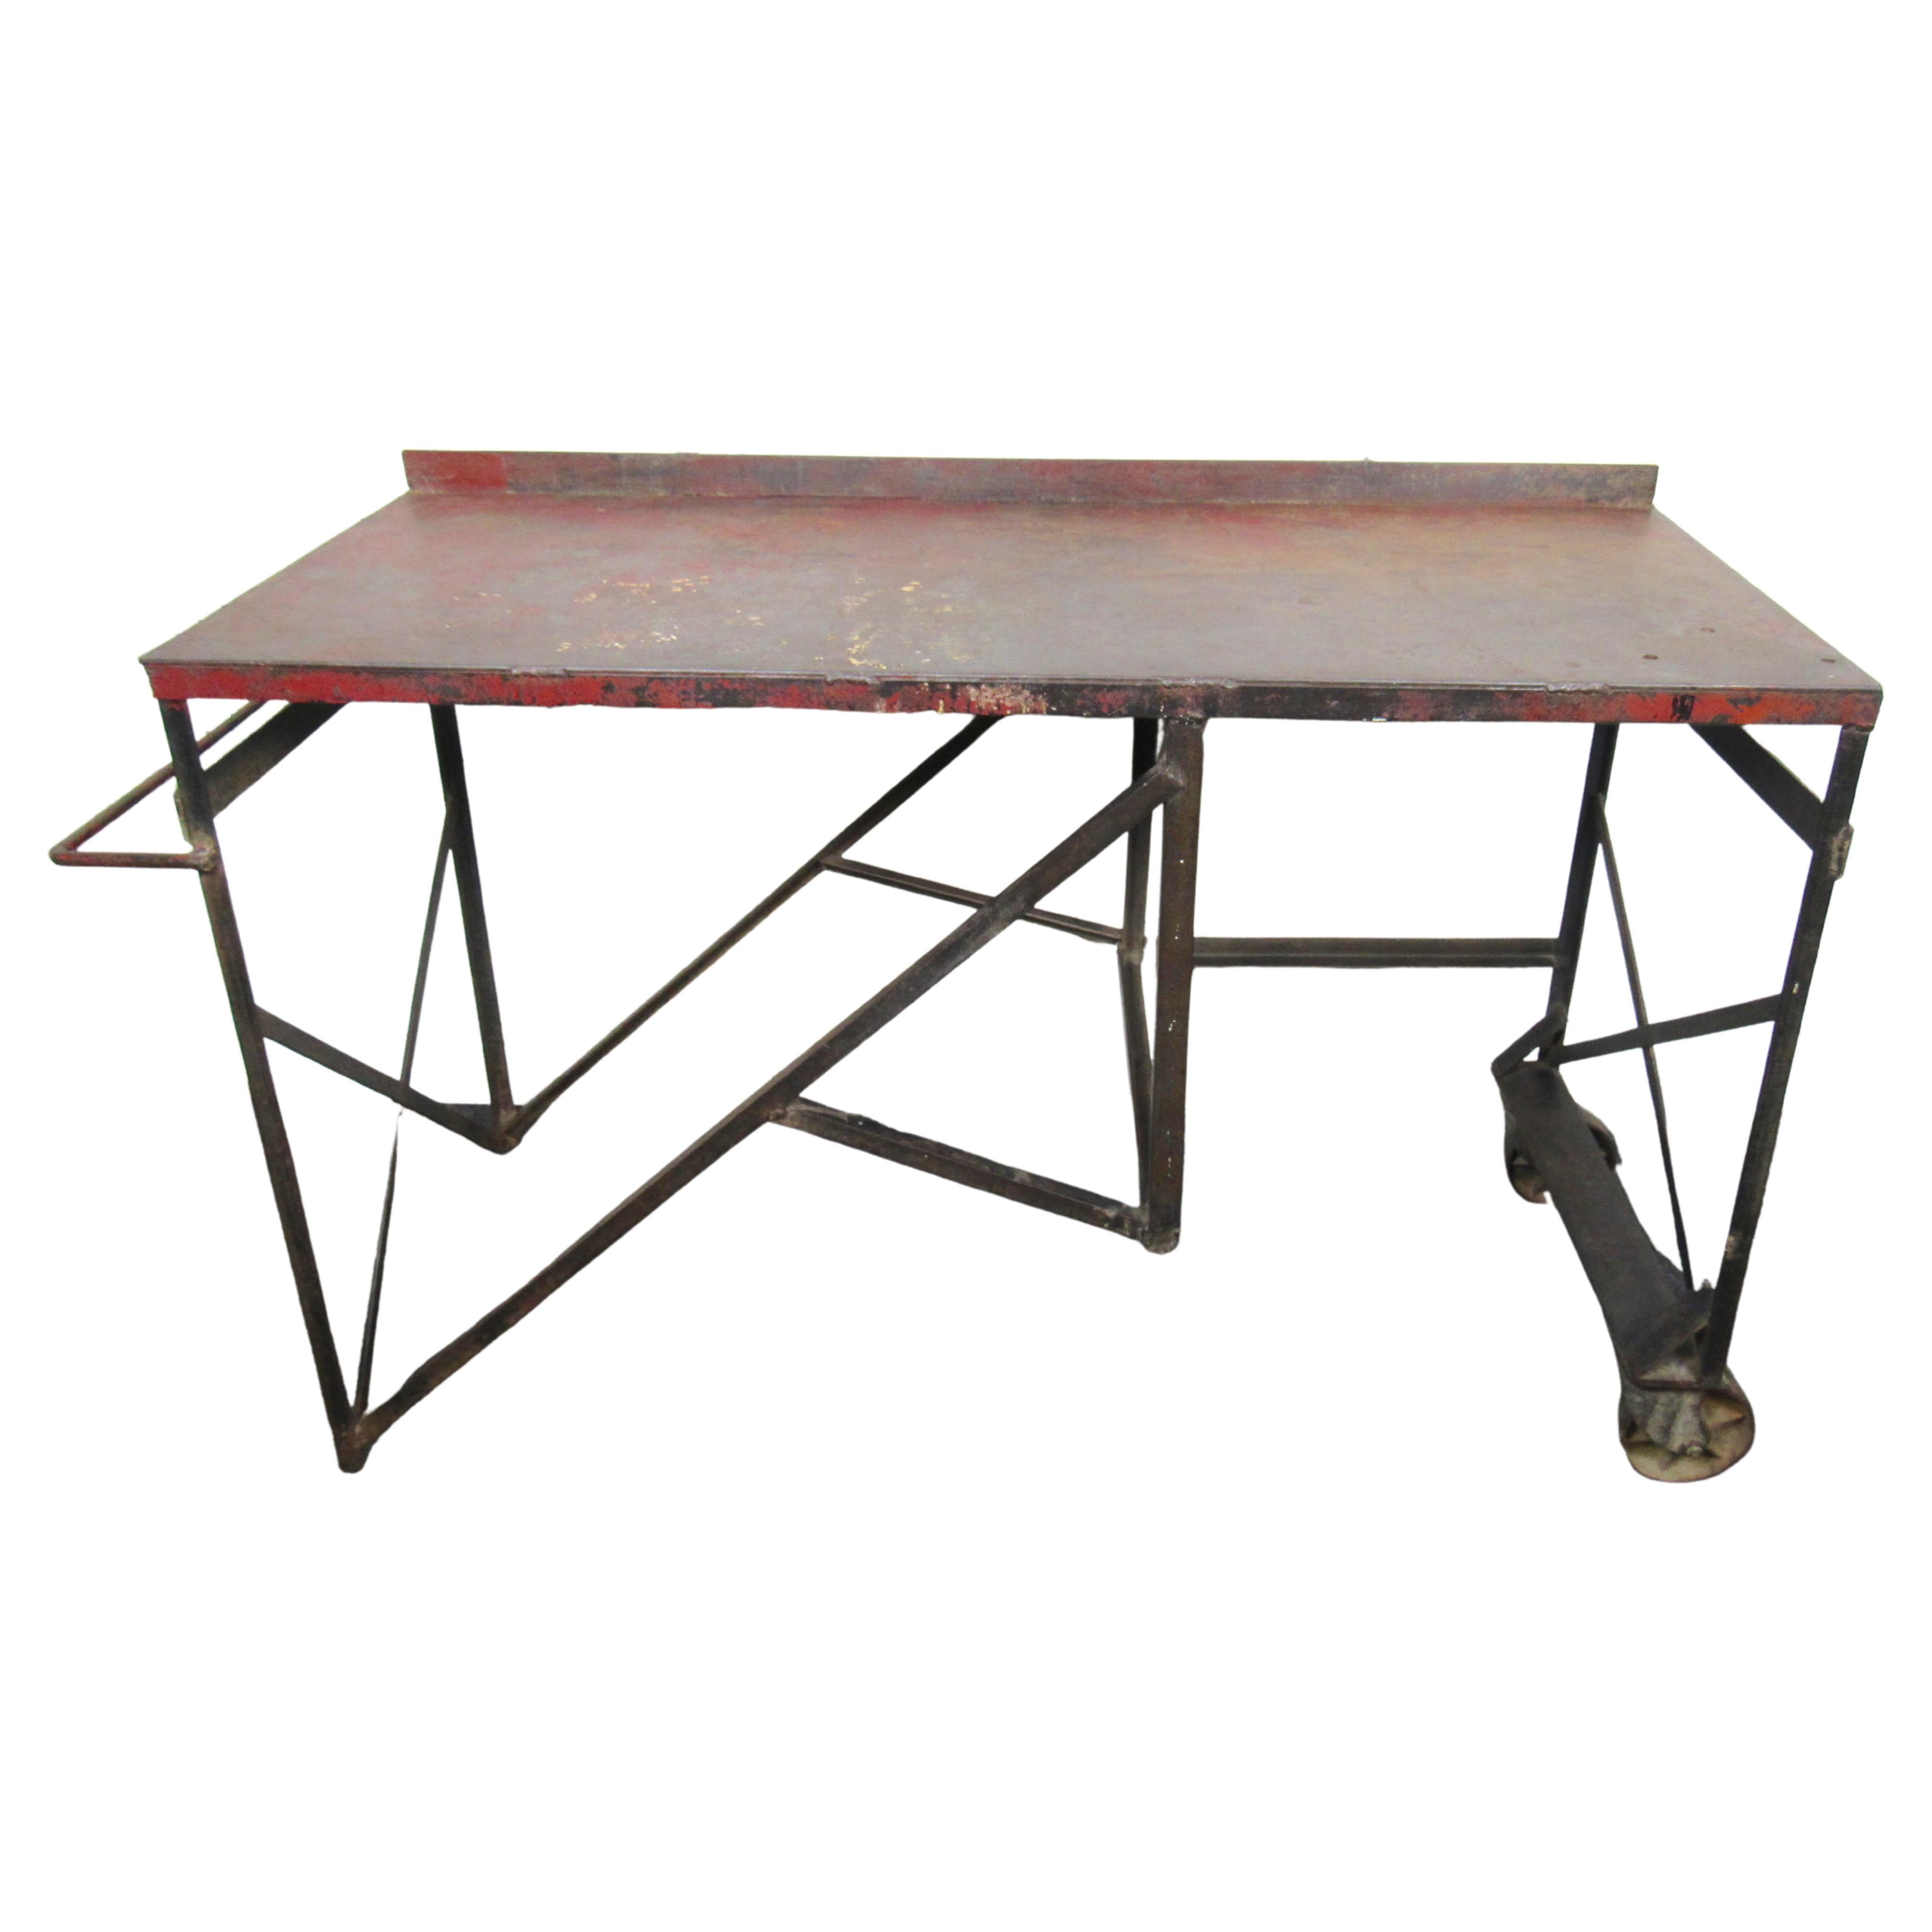 Large Industrial Work Table